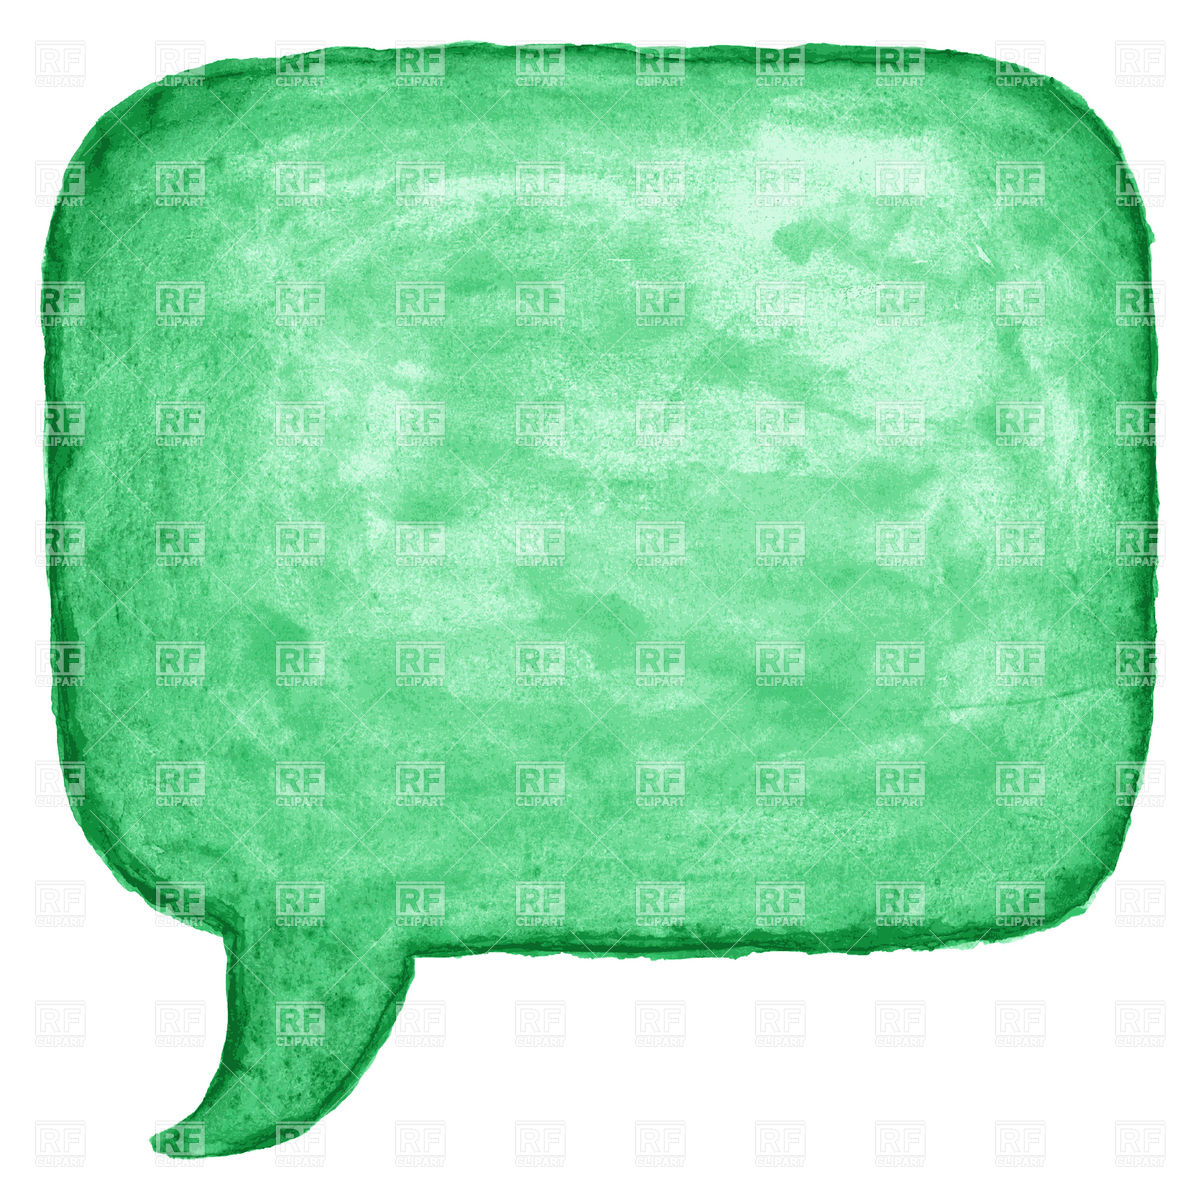 Green square sketched speech bubble, Signs, Symbols, Maps ...